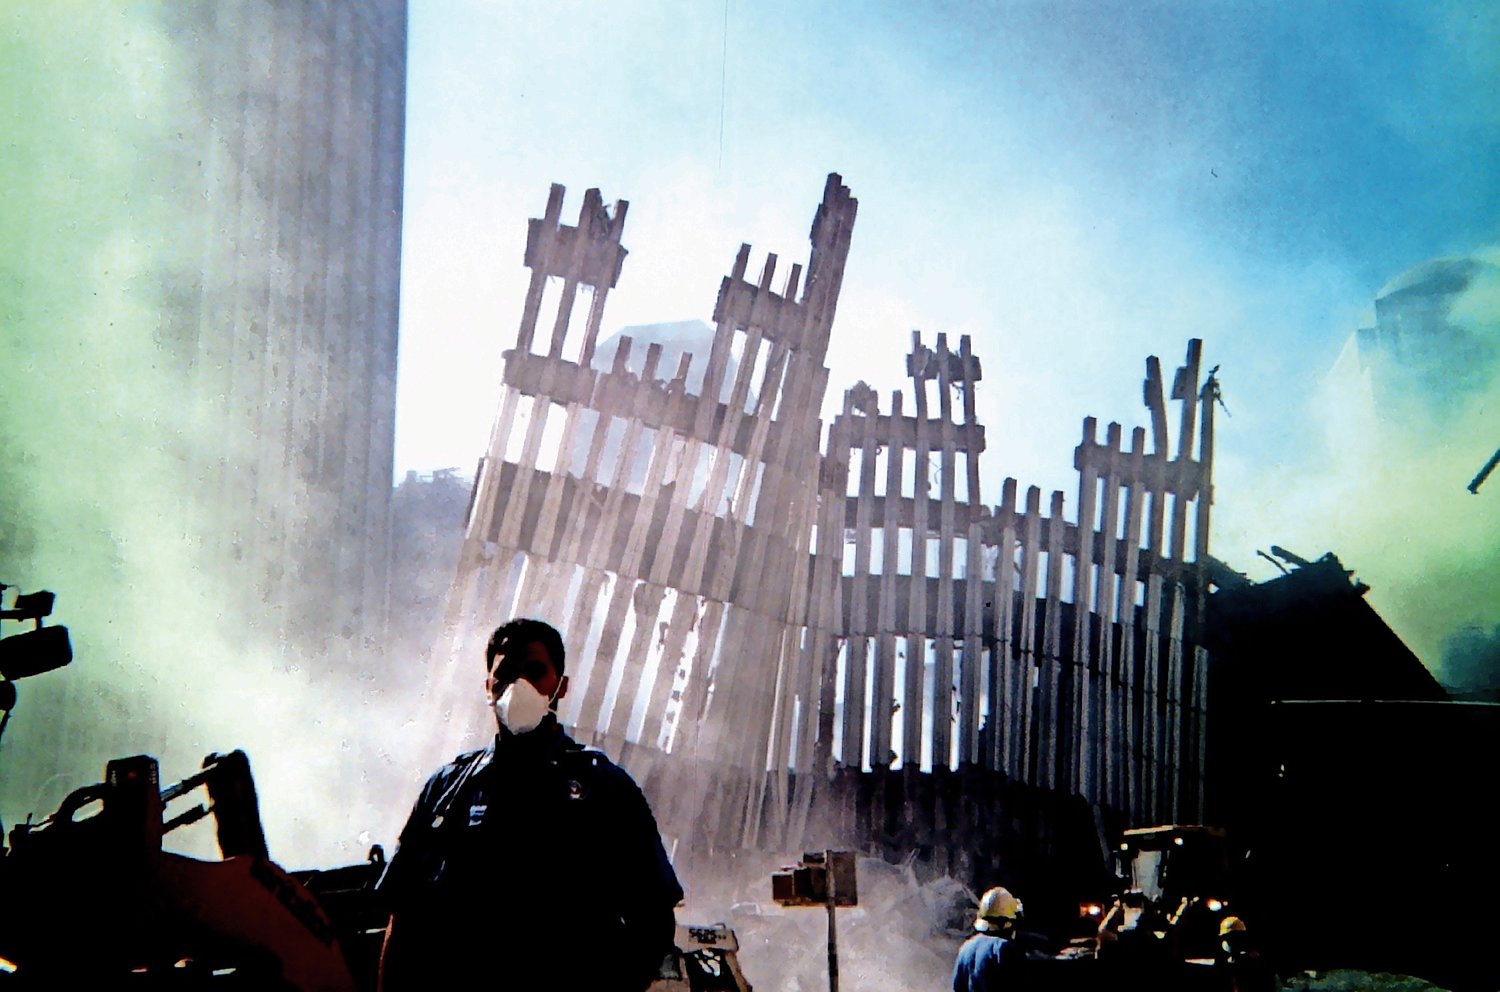 Member Ed Chasan against a harrowing backdrop of a collapsed tower.